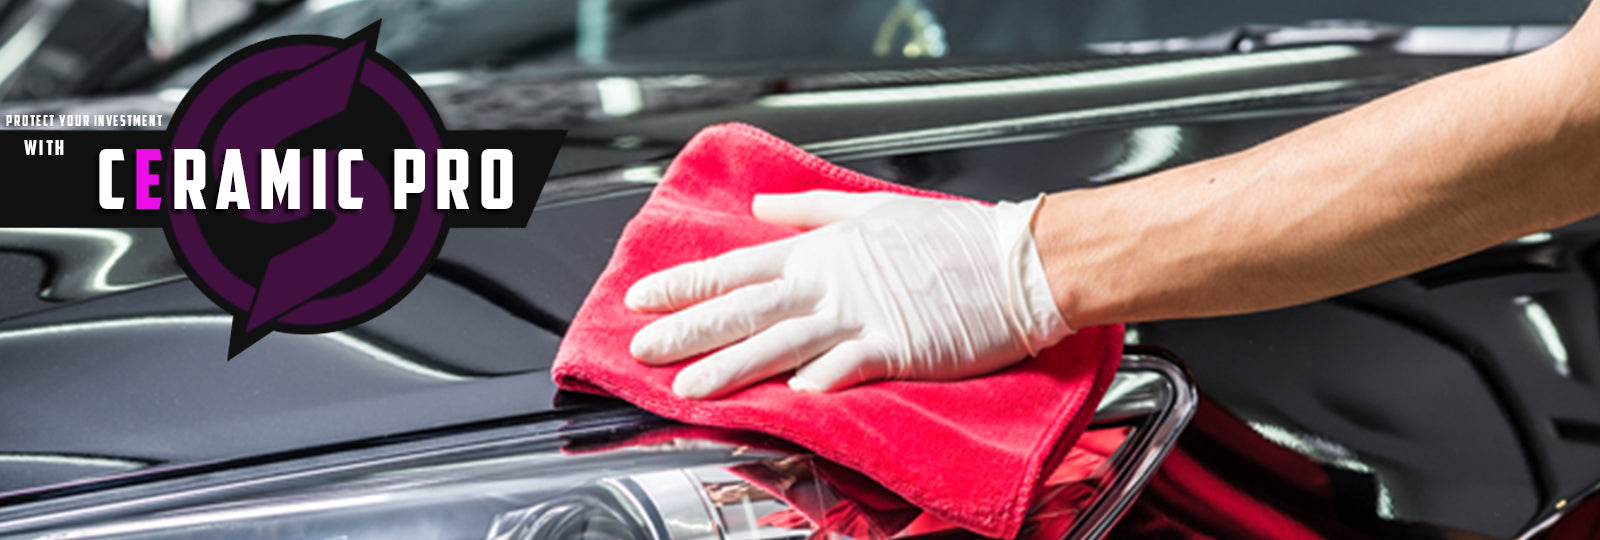 Paint protection and ceramic coatings - Professional Carwashing & Detailing